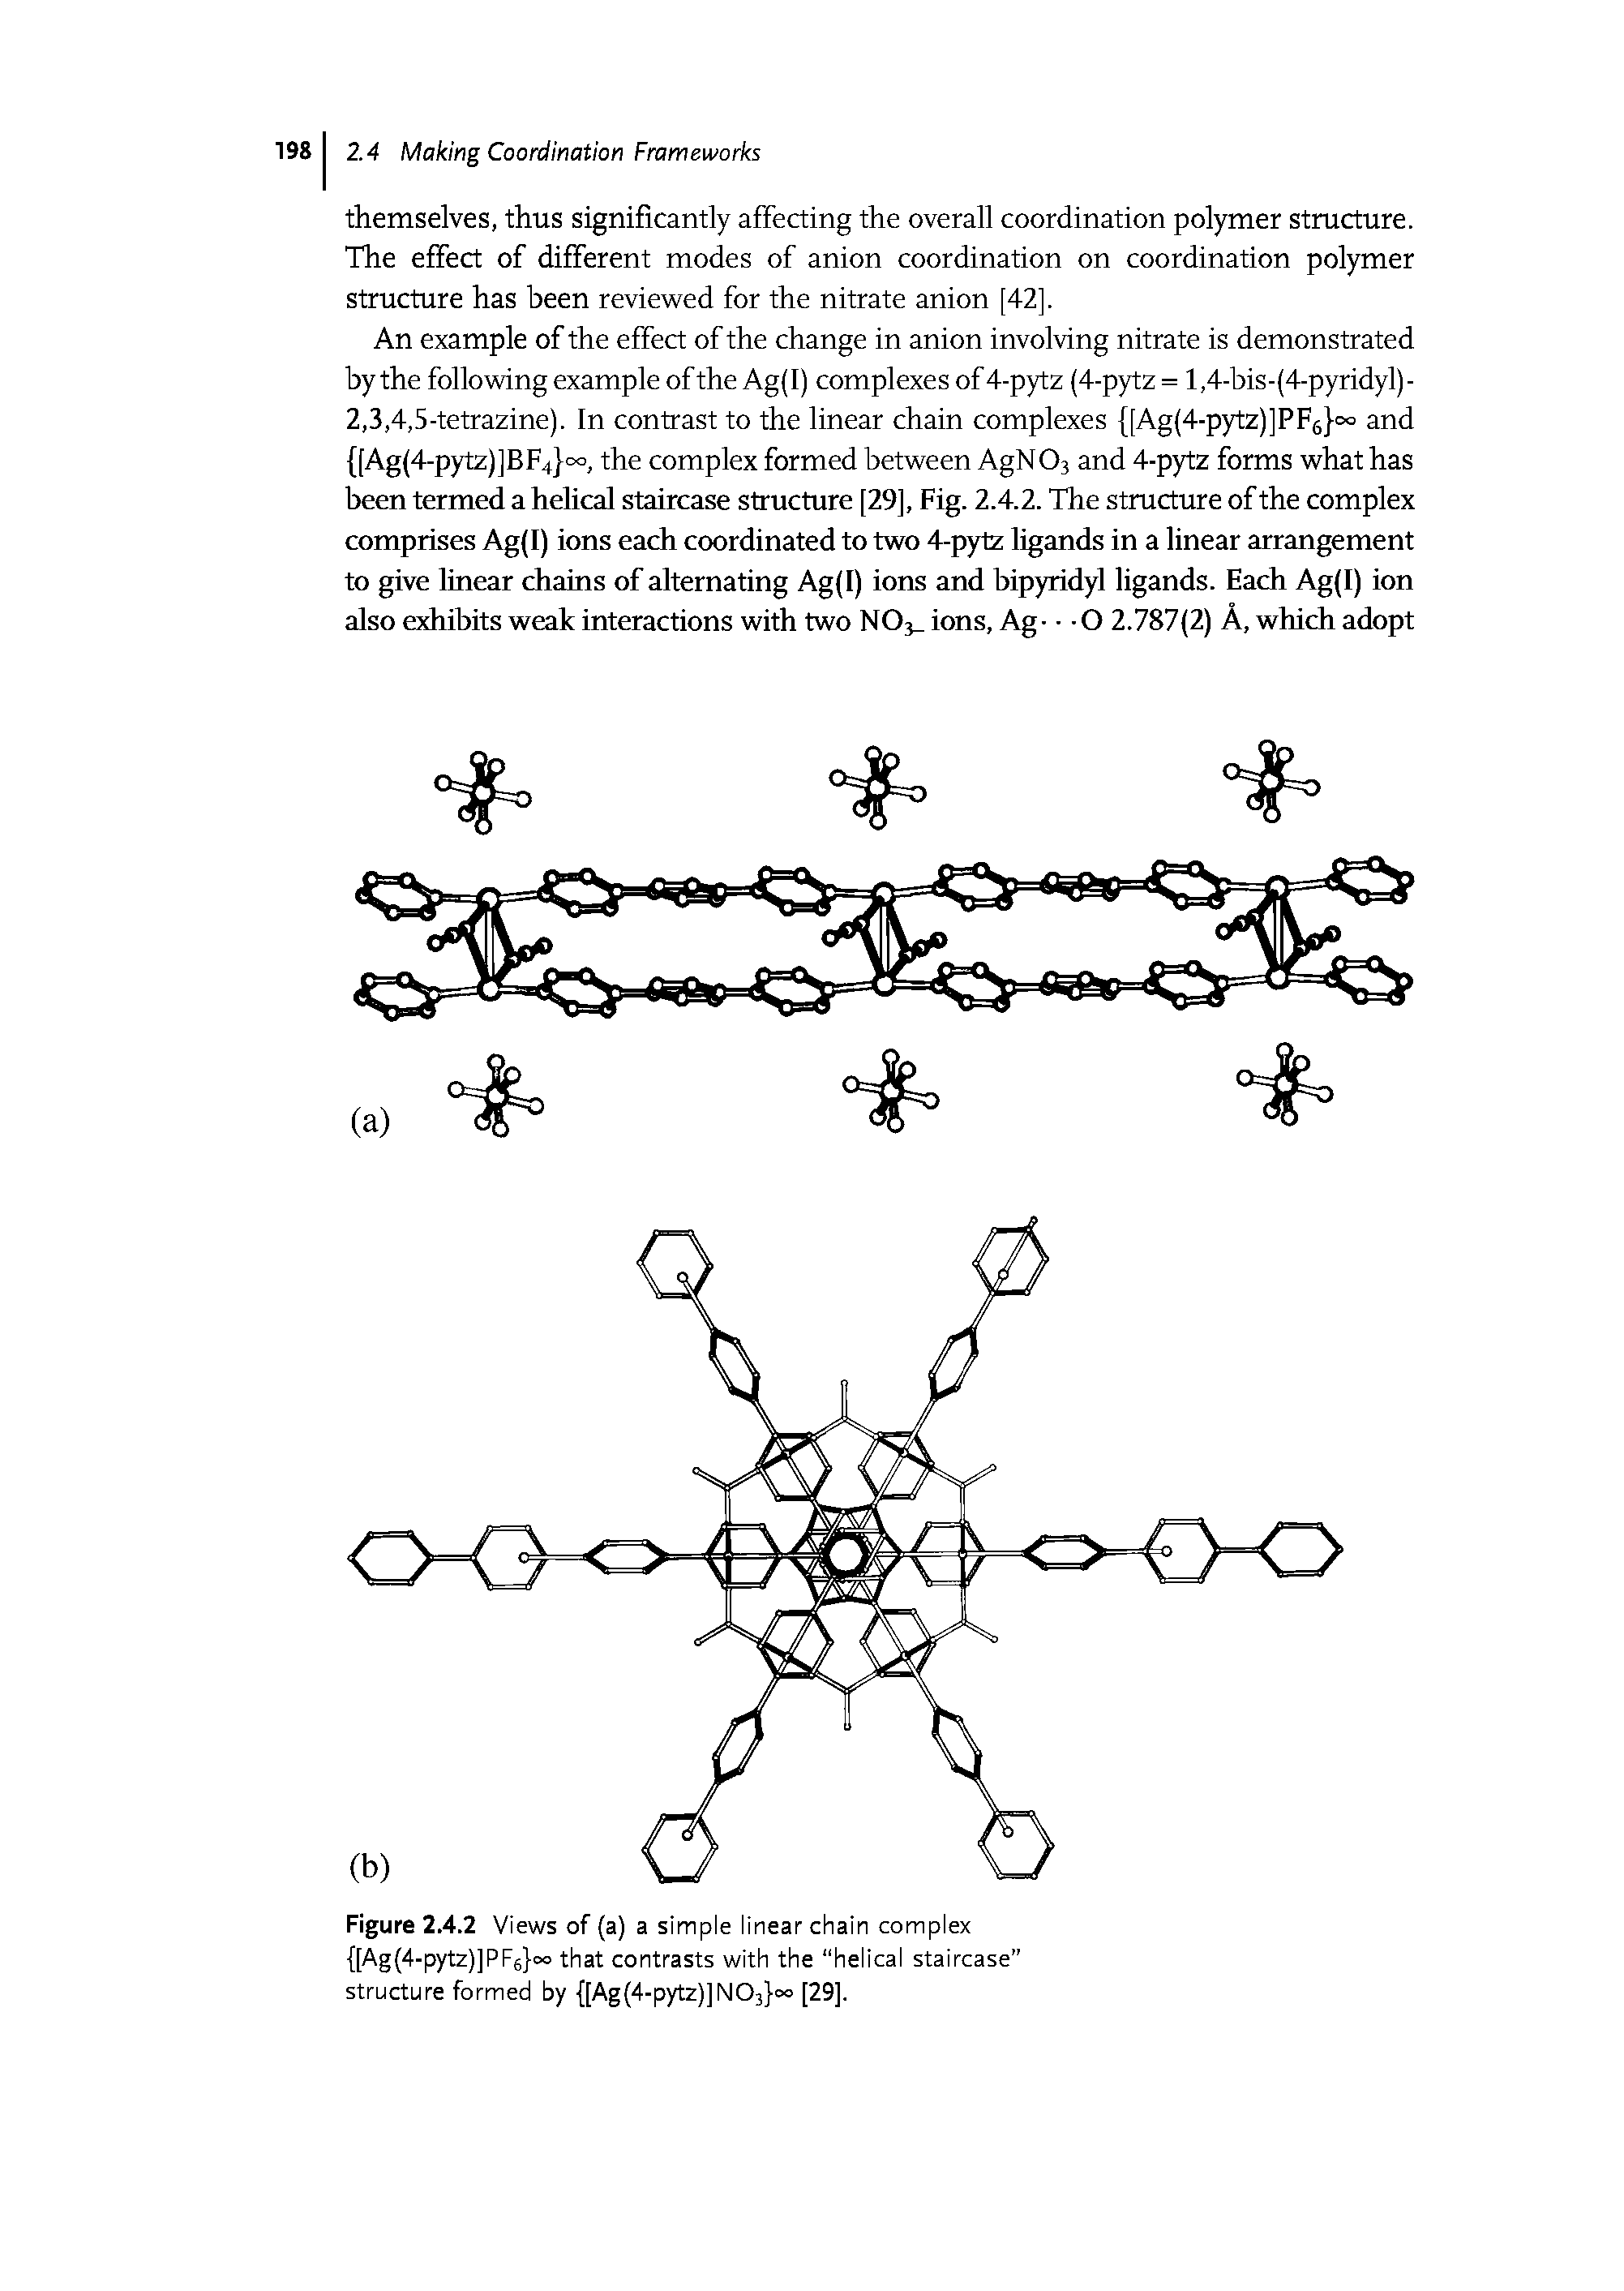 Figure 2.4.2 Views of (a) a simple linear chain complex [Ag(4-pytz)]PF6 °° that contrasts with the helical staircase structure formed by [Ag(4-pytz)]N03 °° [29].